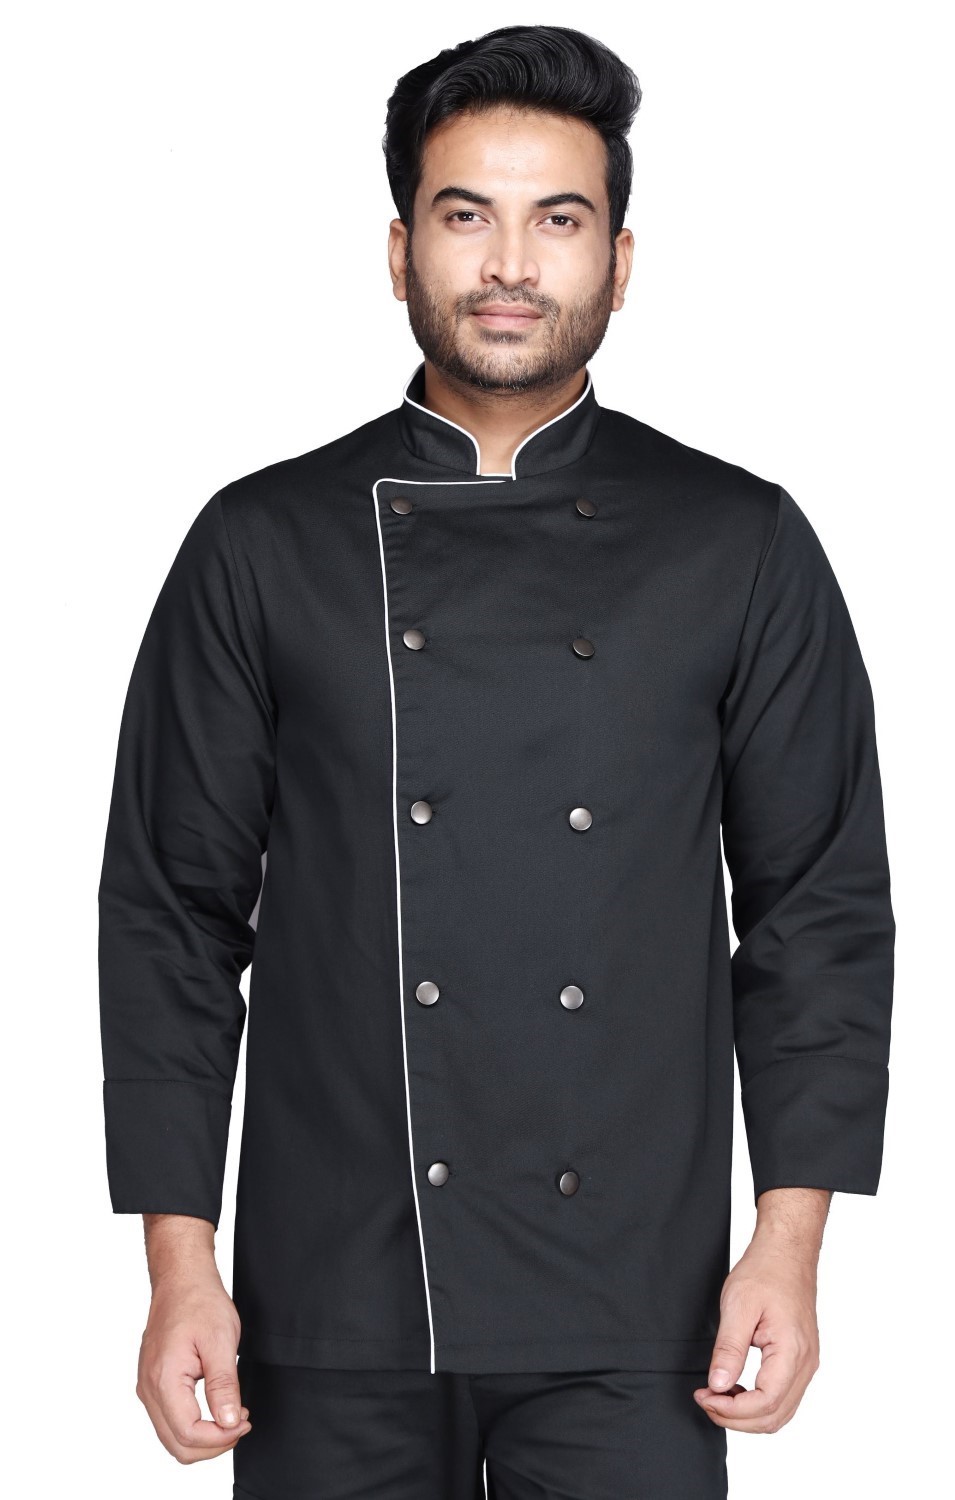 Comfortable and professional chef coat. Cool and sweat absorbent cotton blend fabric.